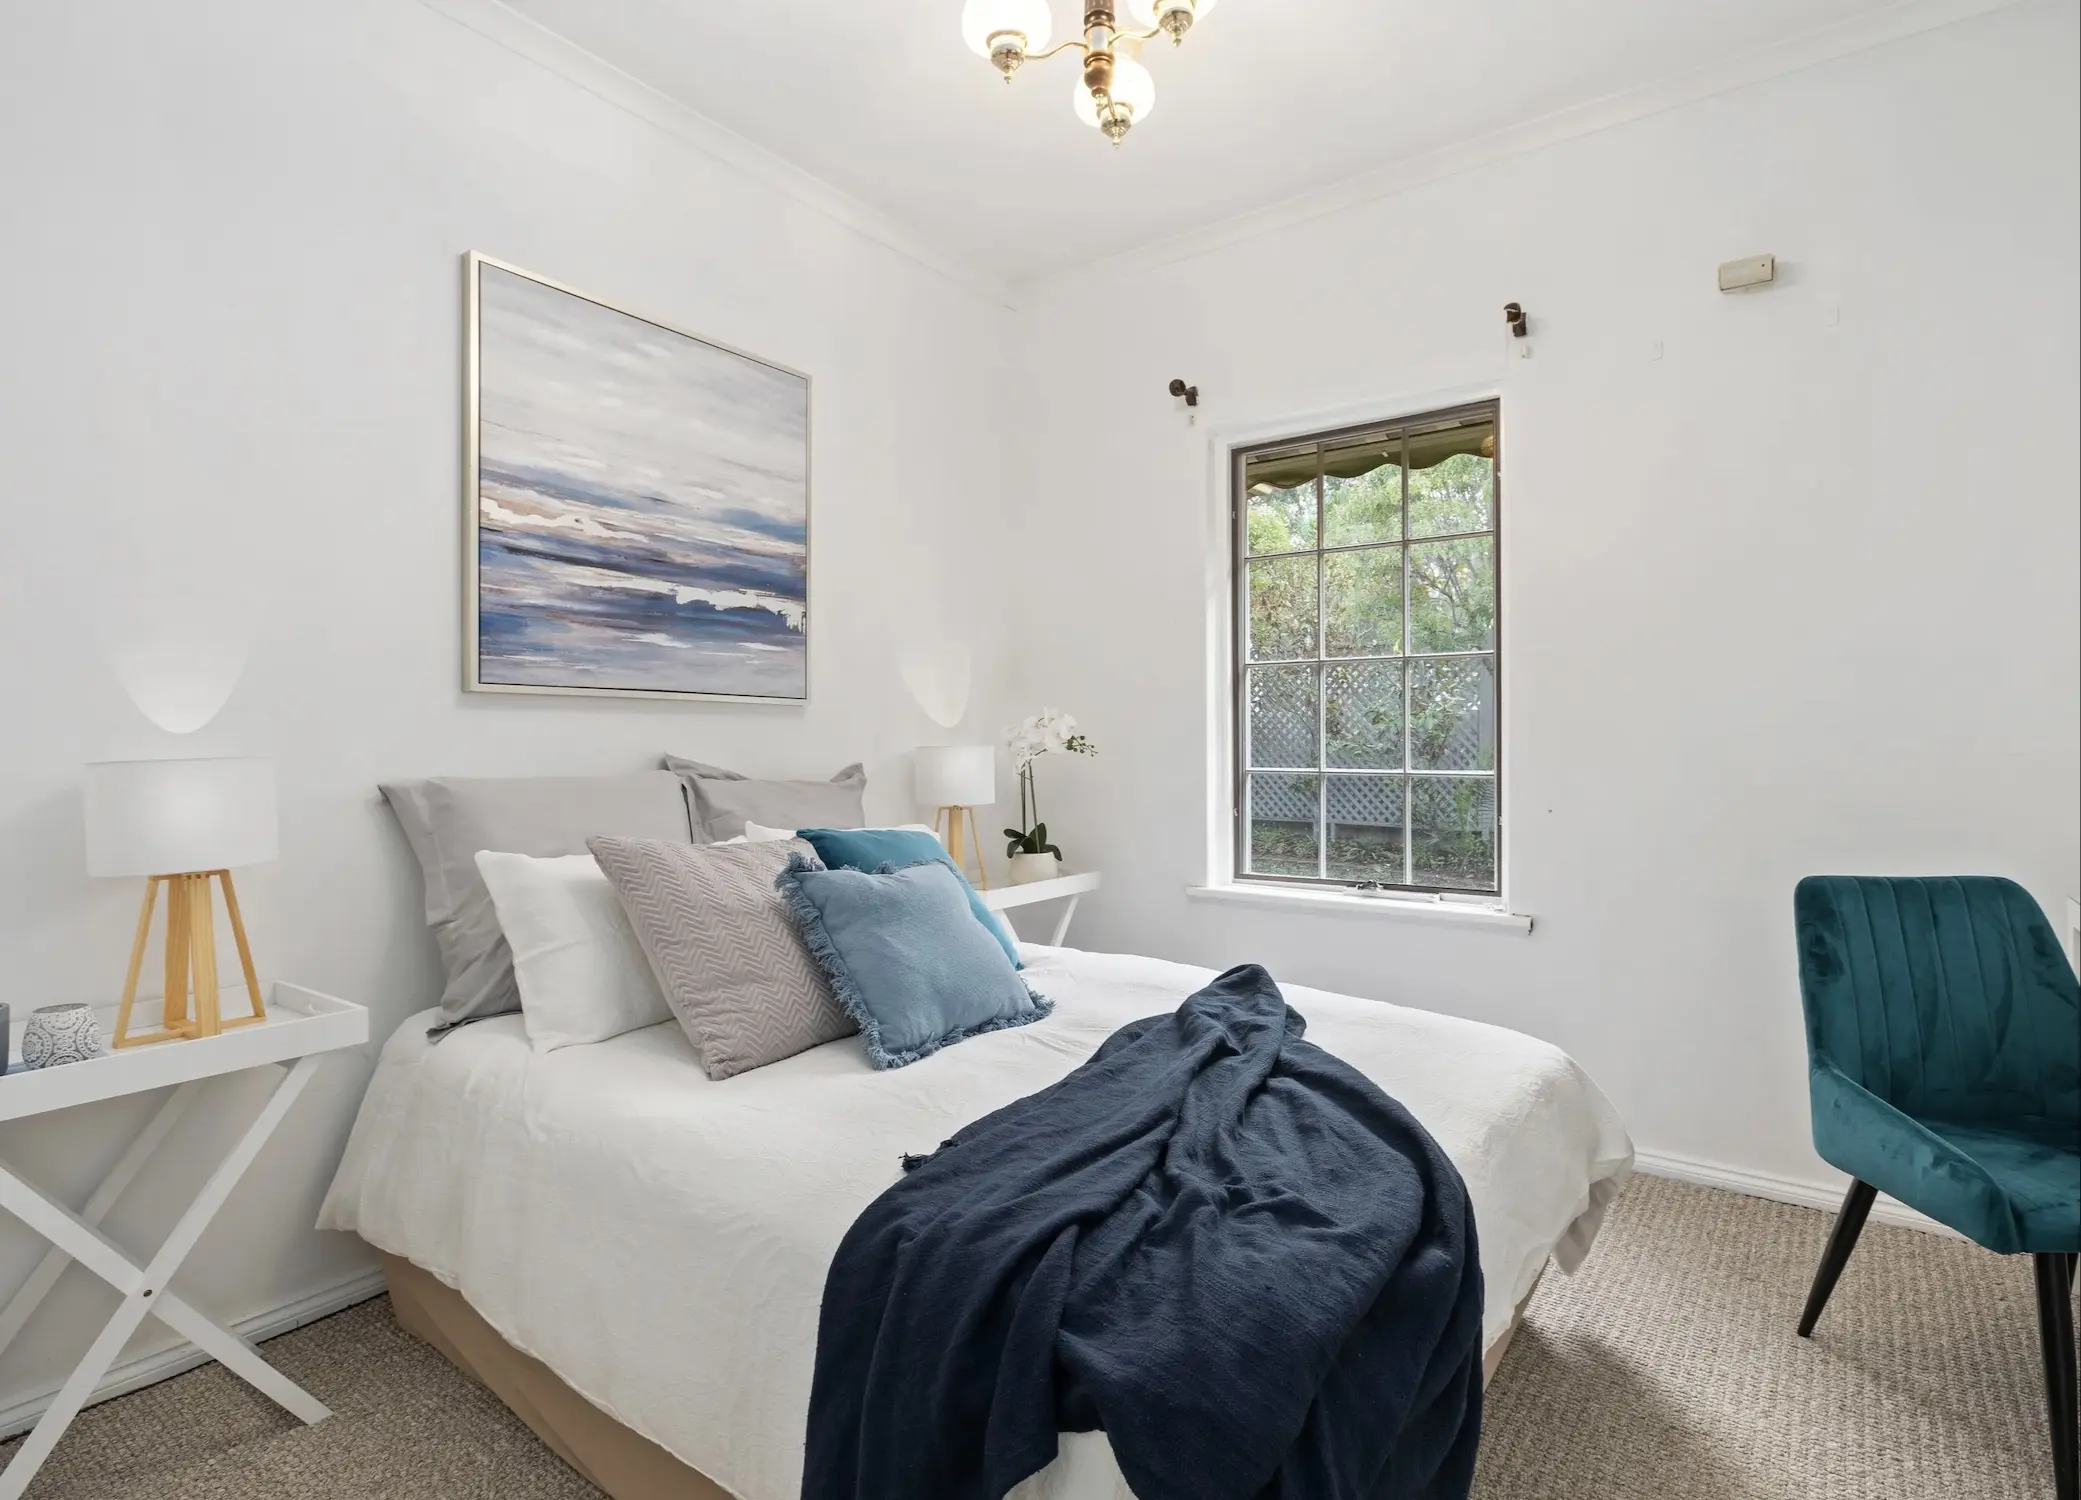 A bedroom in Pooraka, Adelaide styled by Amor Home Styling.